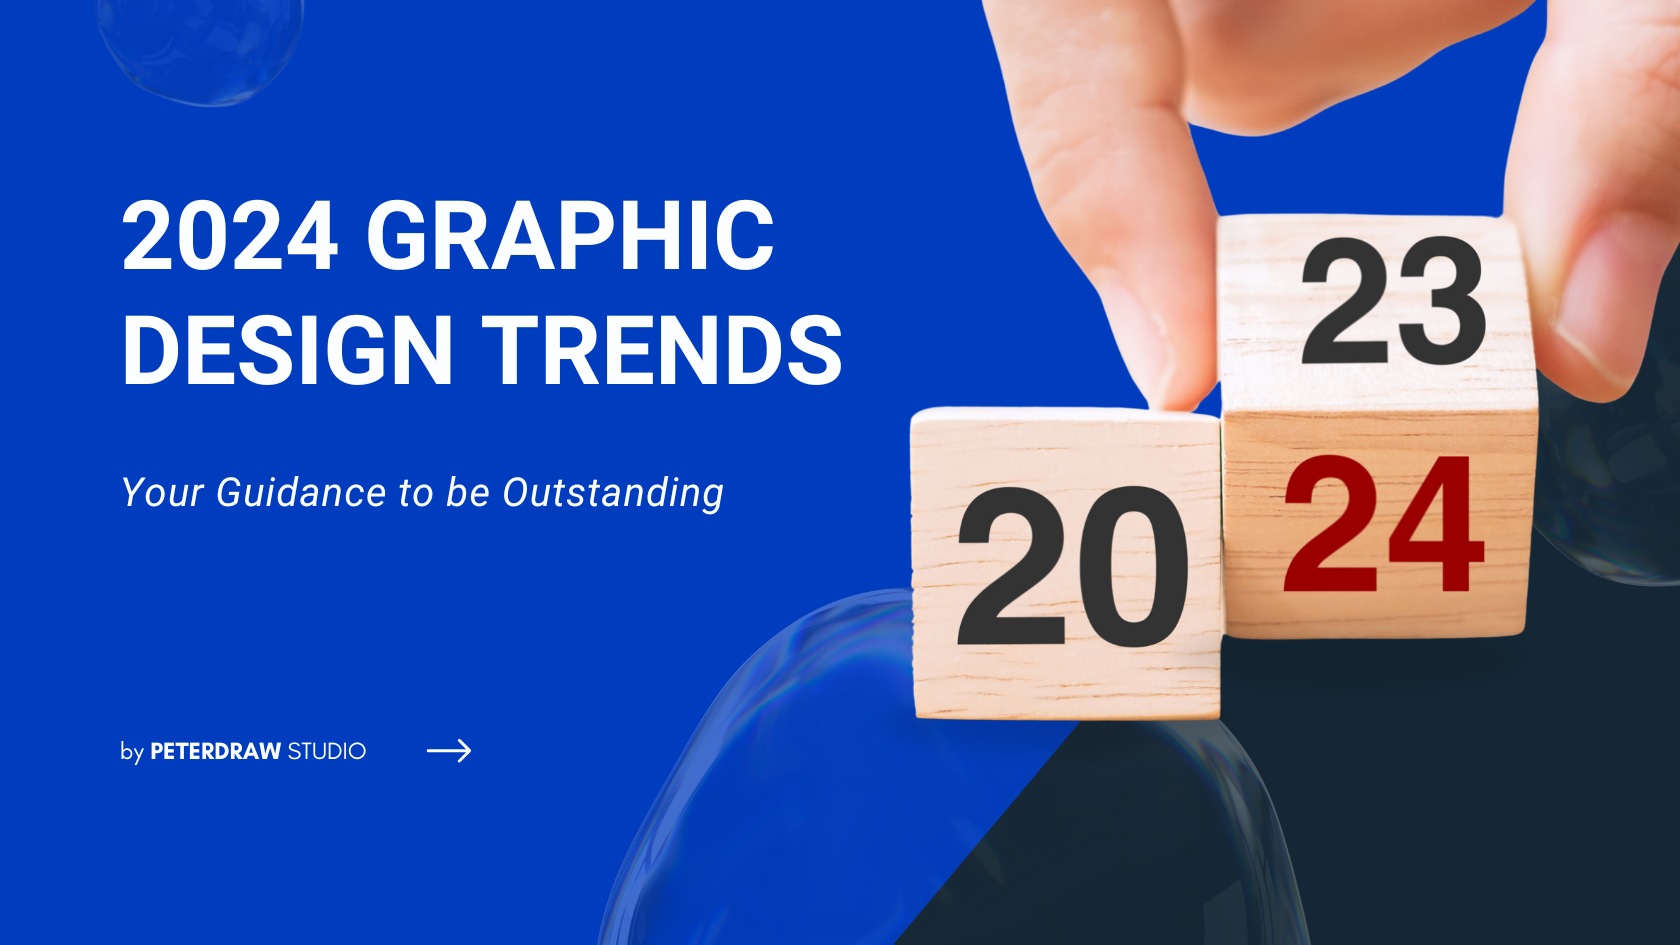 2024 Graphic Design Trends Your Guidance to be Outstanding Peterdraw